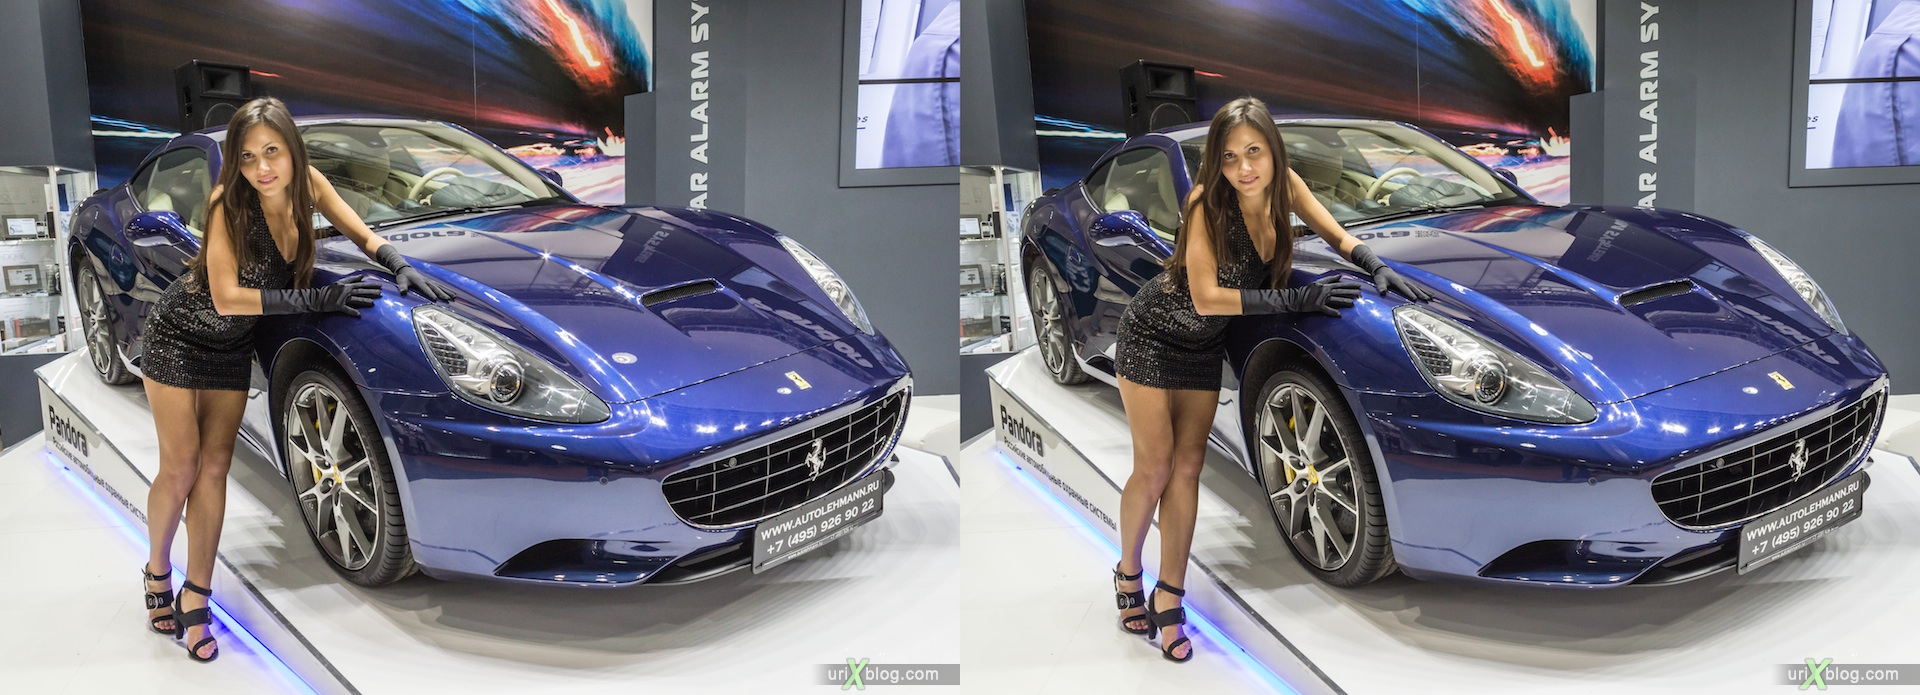 2012, Peugeot, girl, model, Moscow International Automobile Salon, auto show, 3D, stereo pair, cross-eyed, crossview